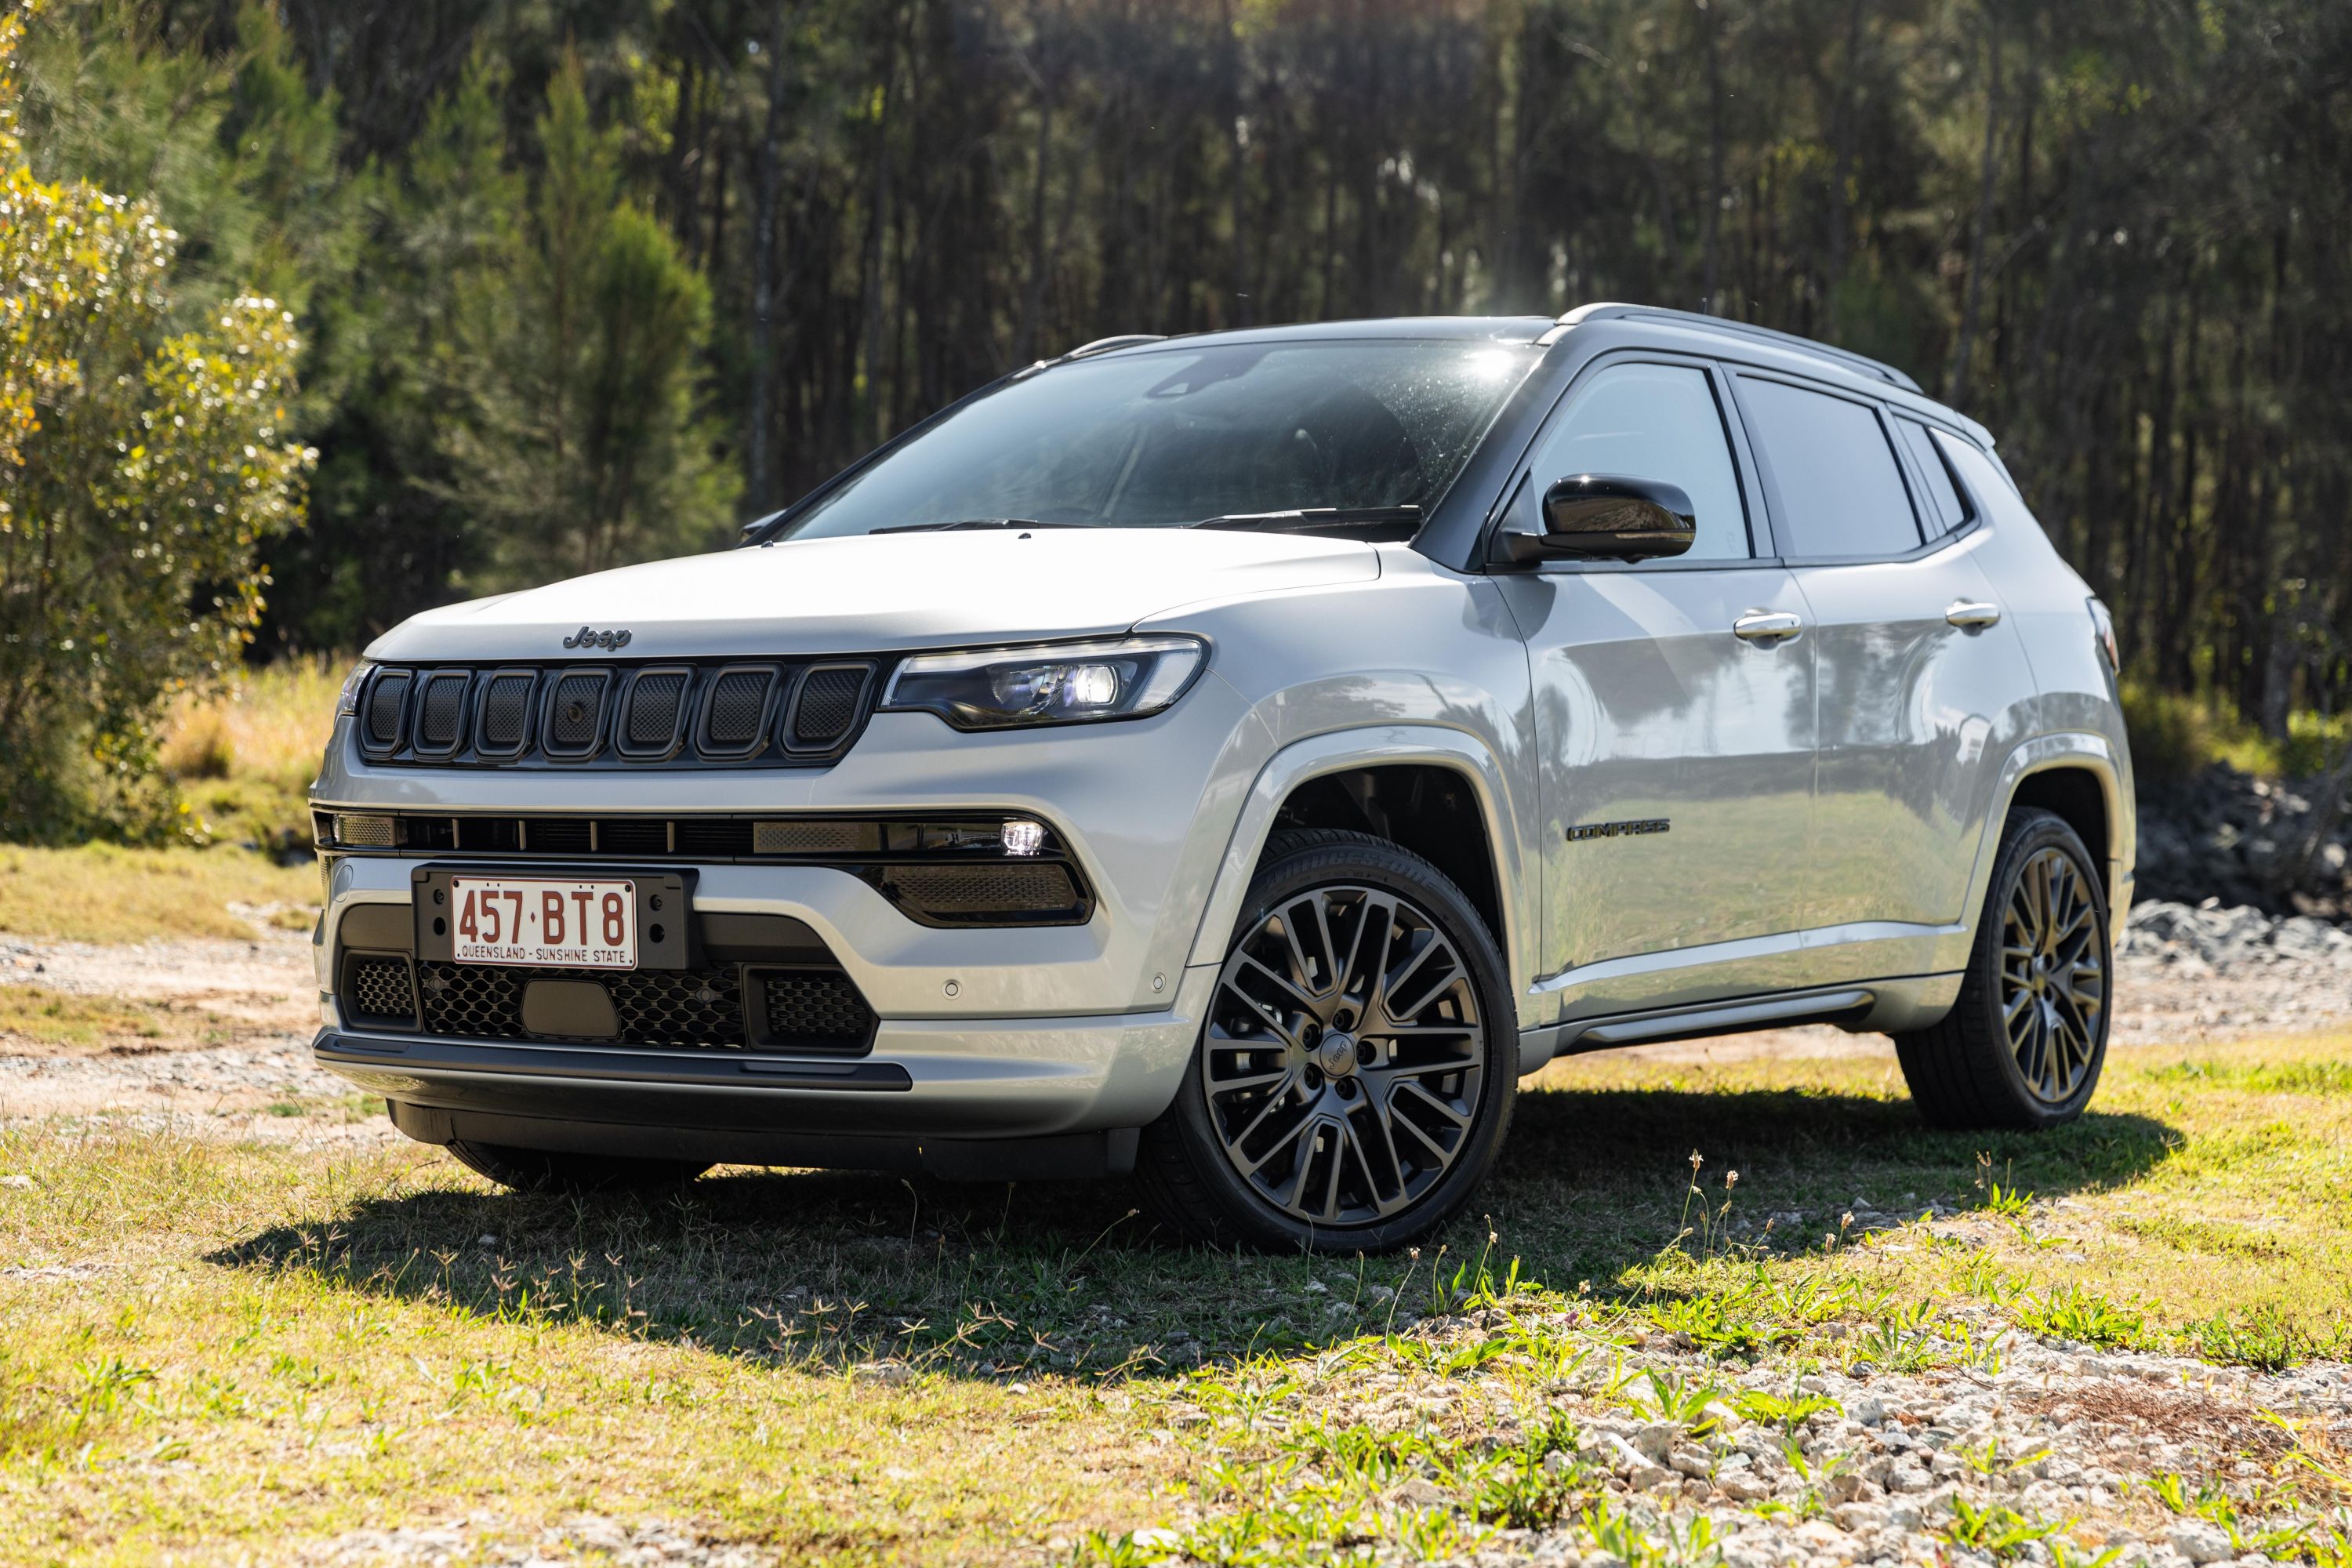 Jeep compass Cars Price in India 2022: Jeep compass Cars Images